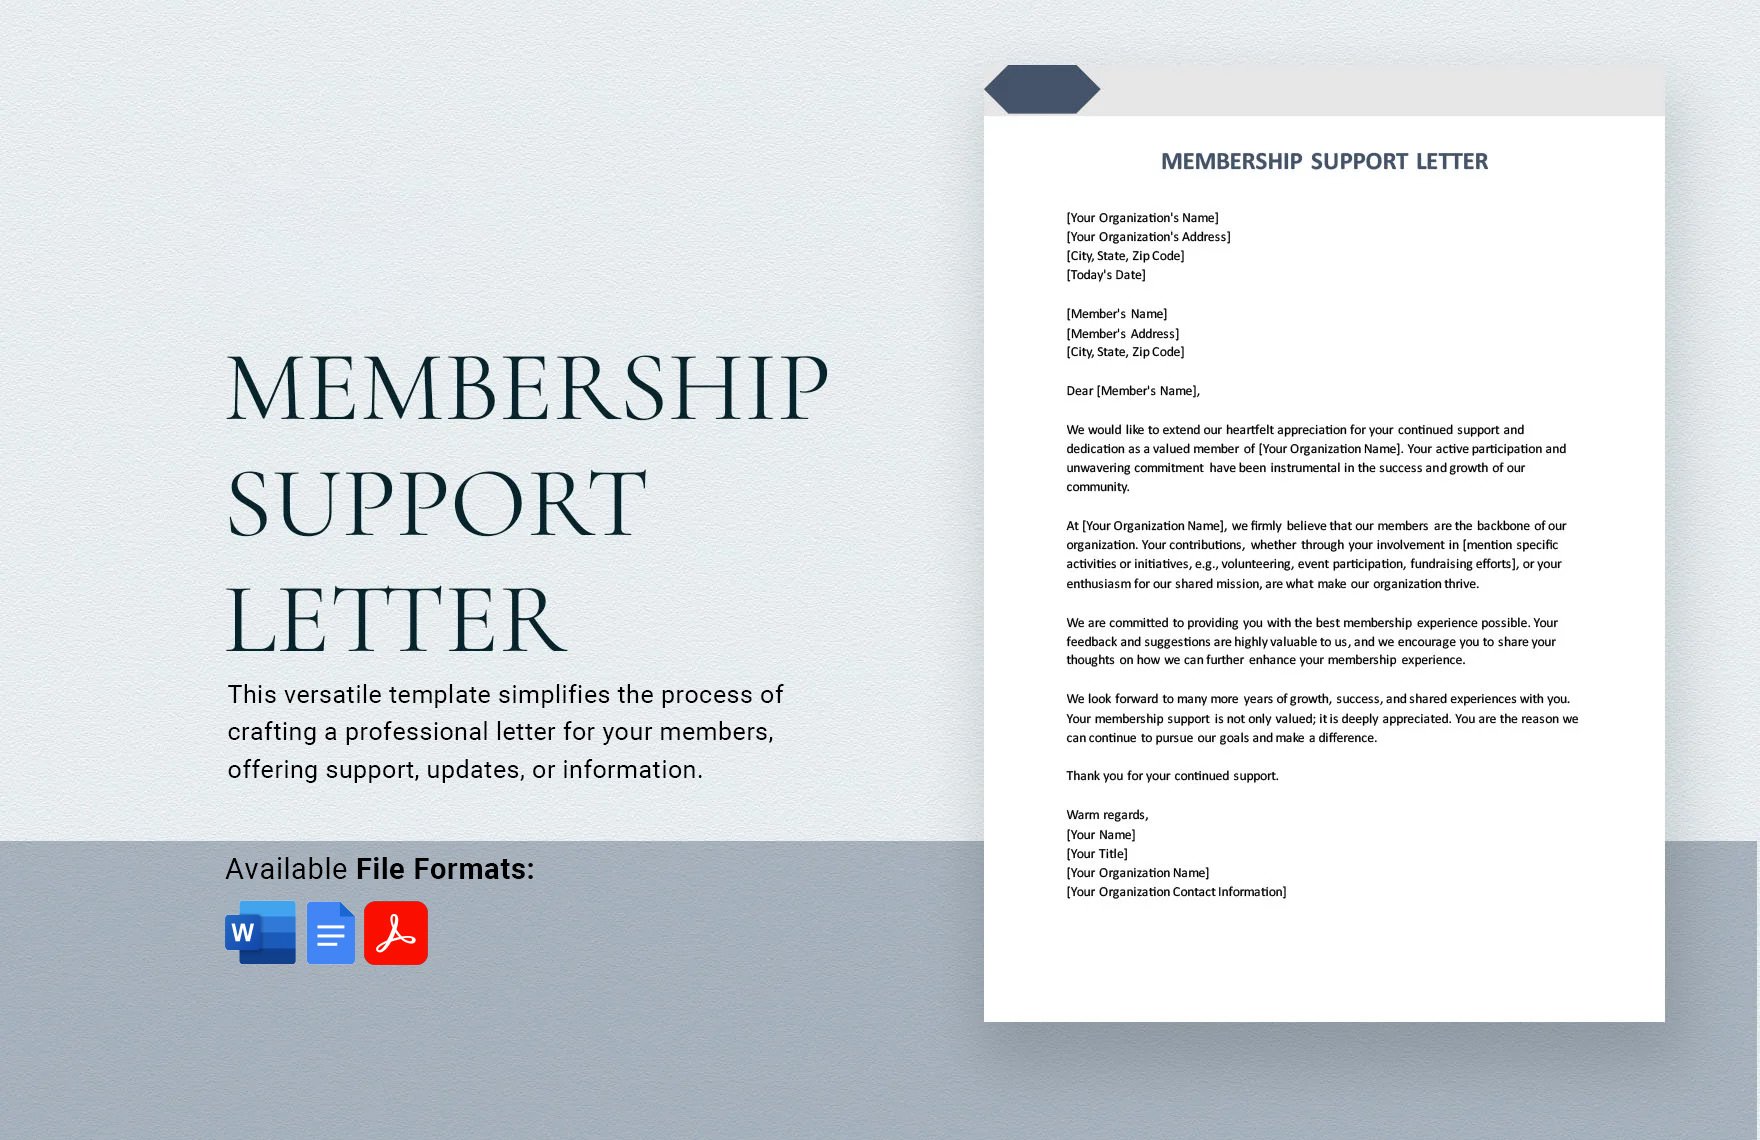 Membership Support Letter in Word, Google Docs, PDF